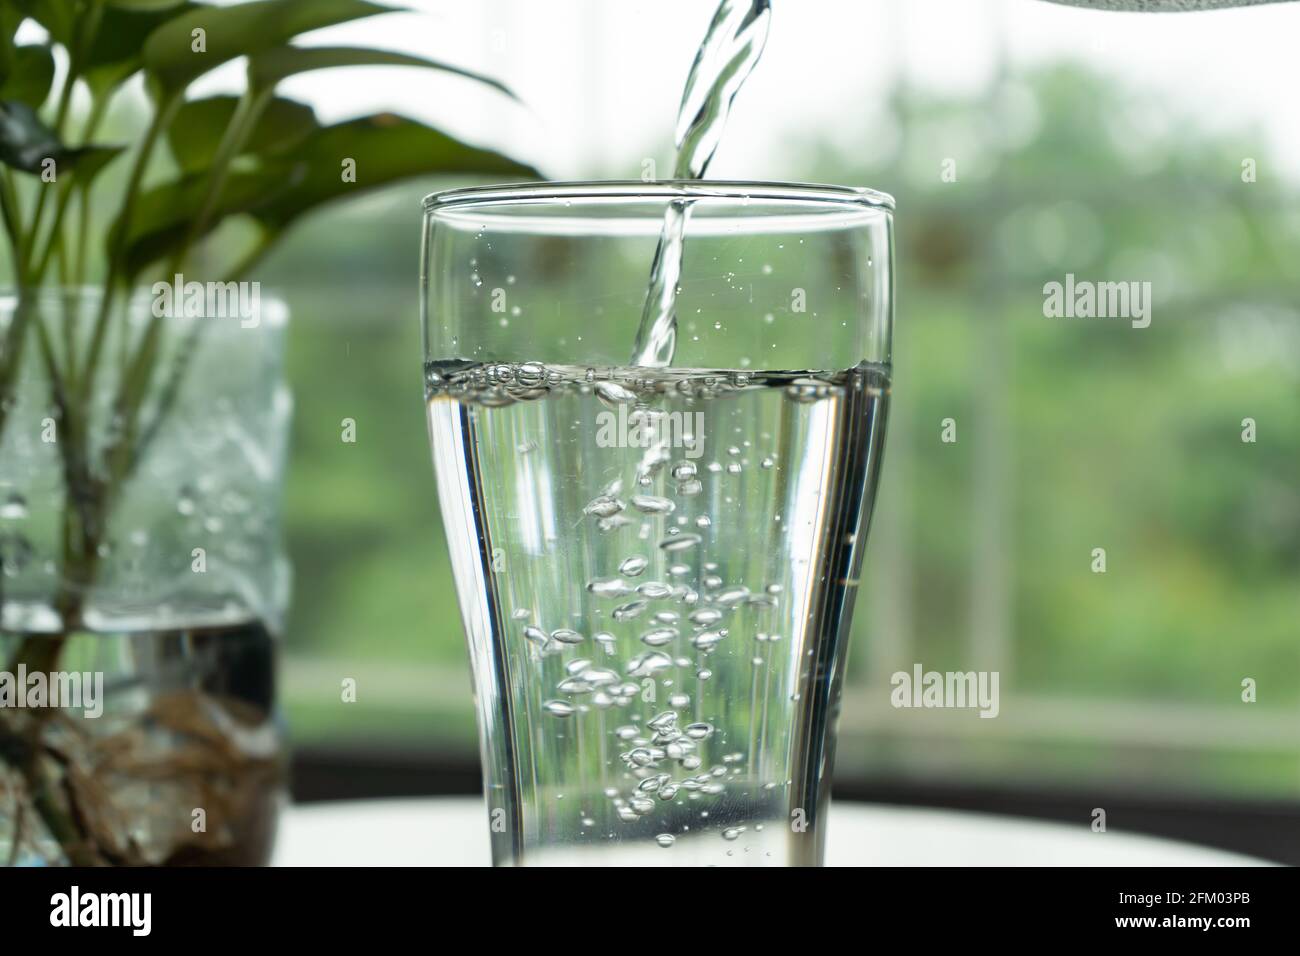 Pouring water into a glass Stock Photo